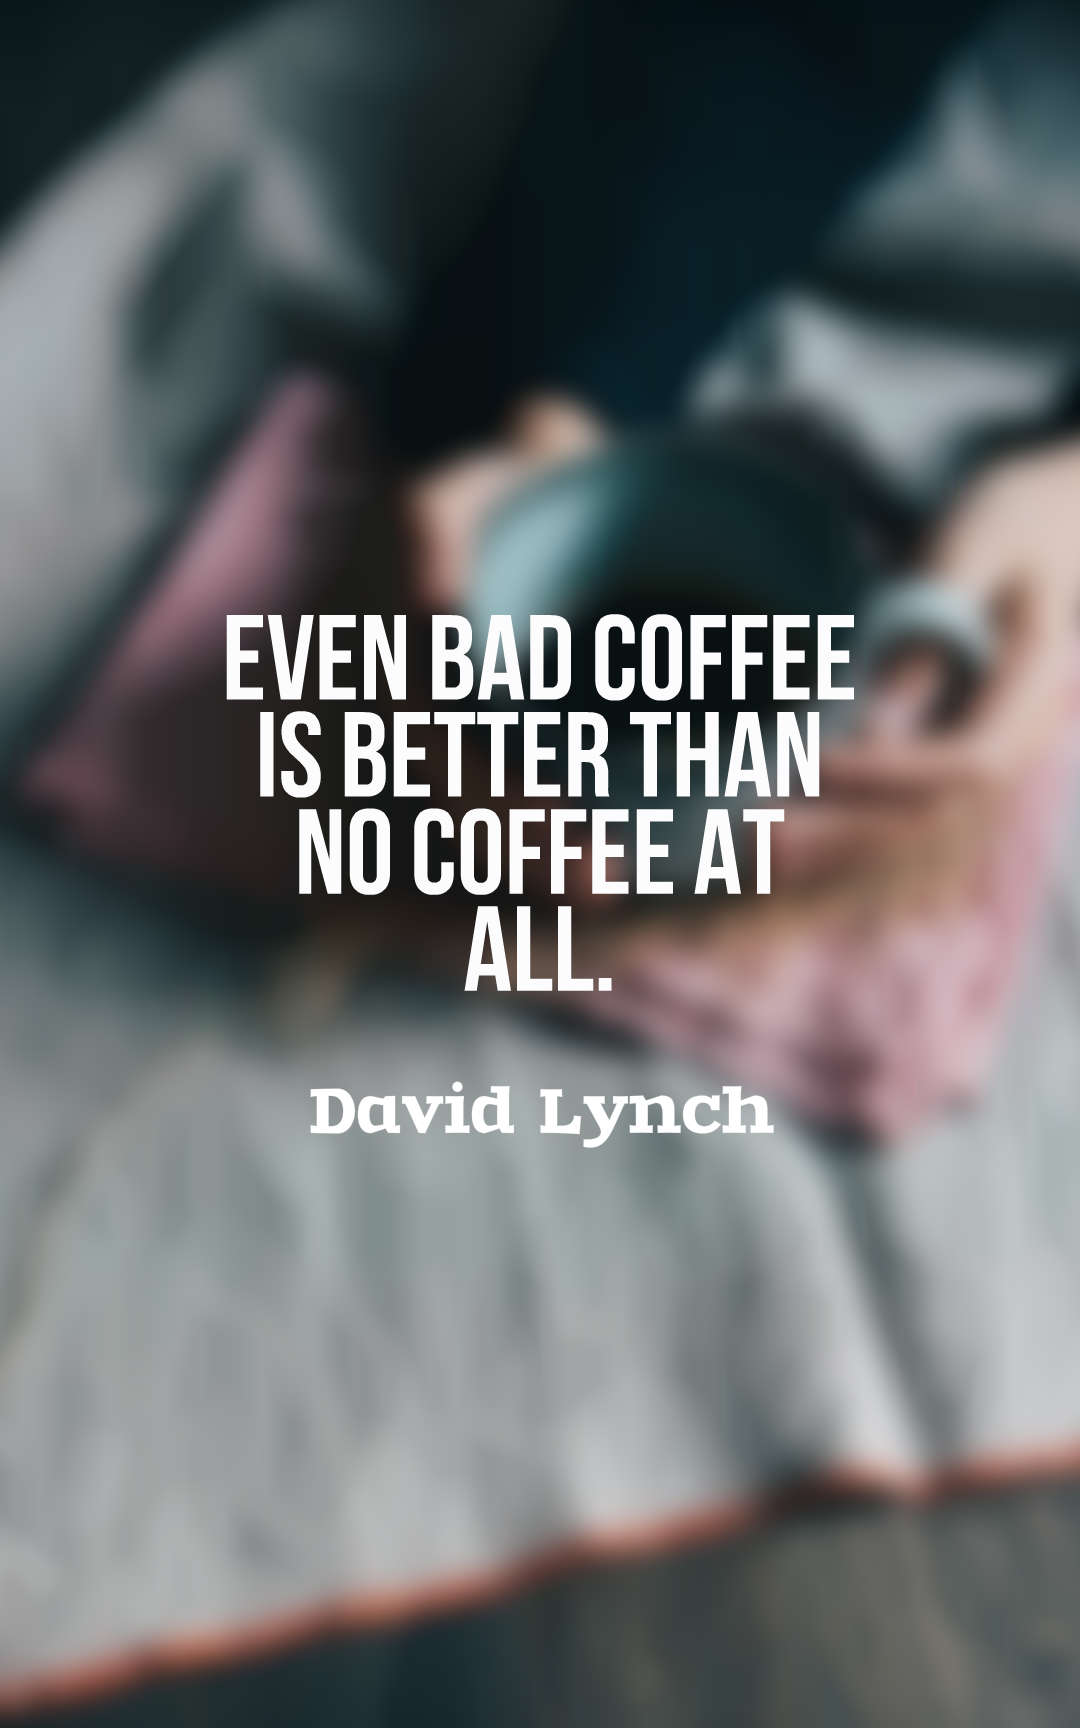 Even bad coffee is better than no coffee at all.